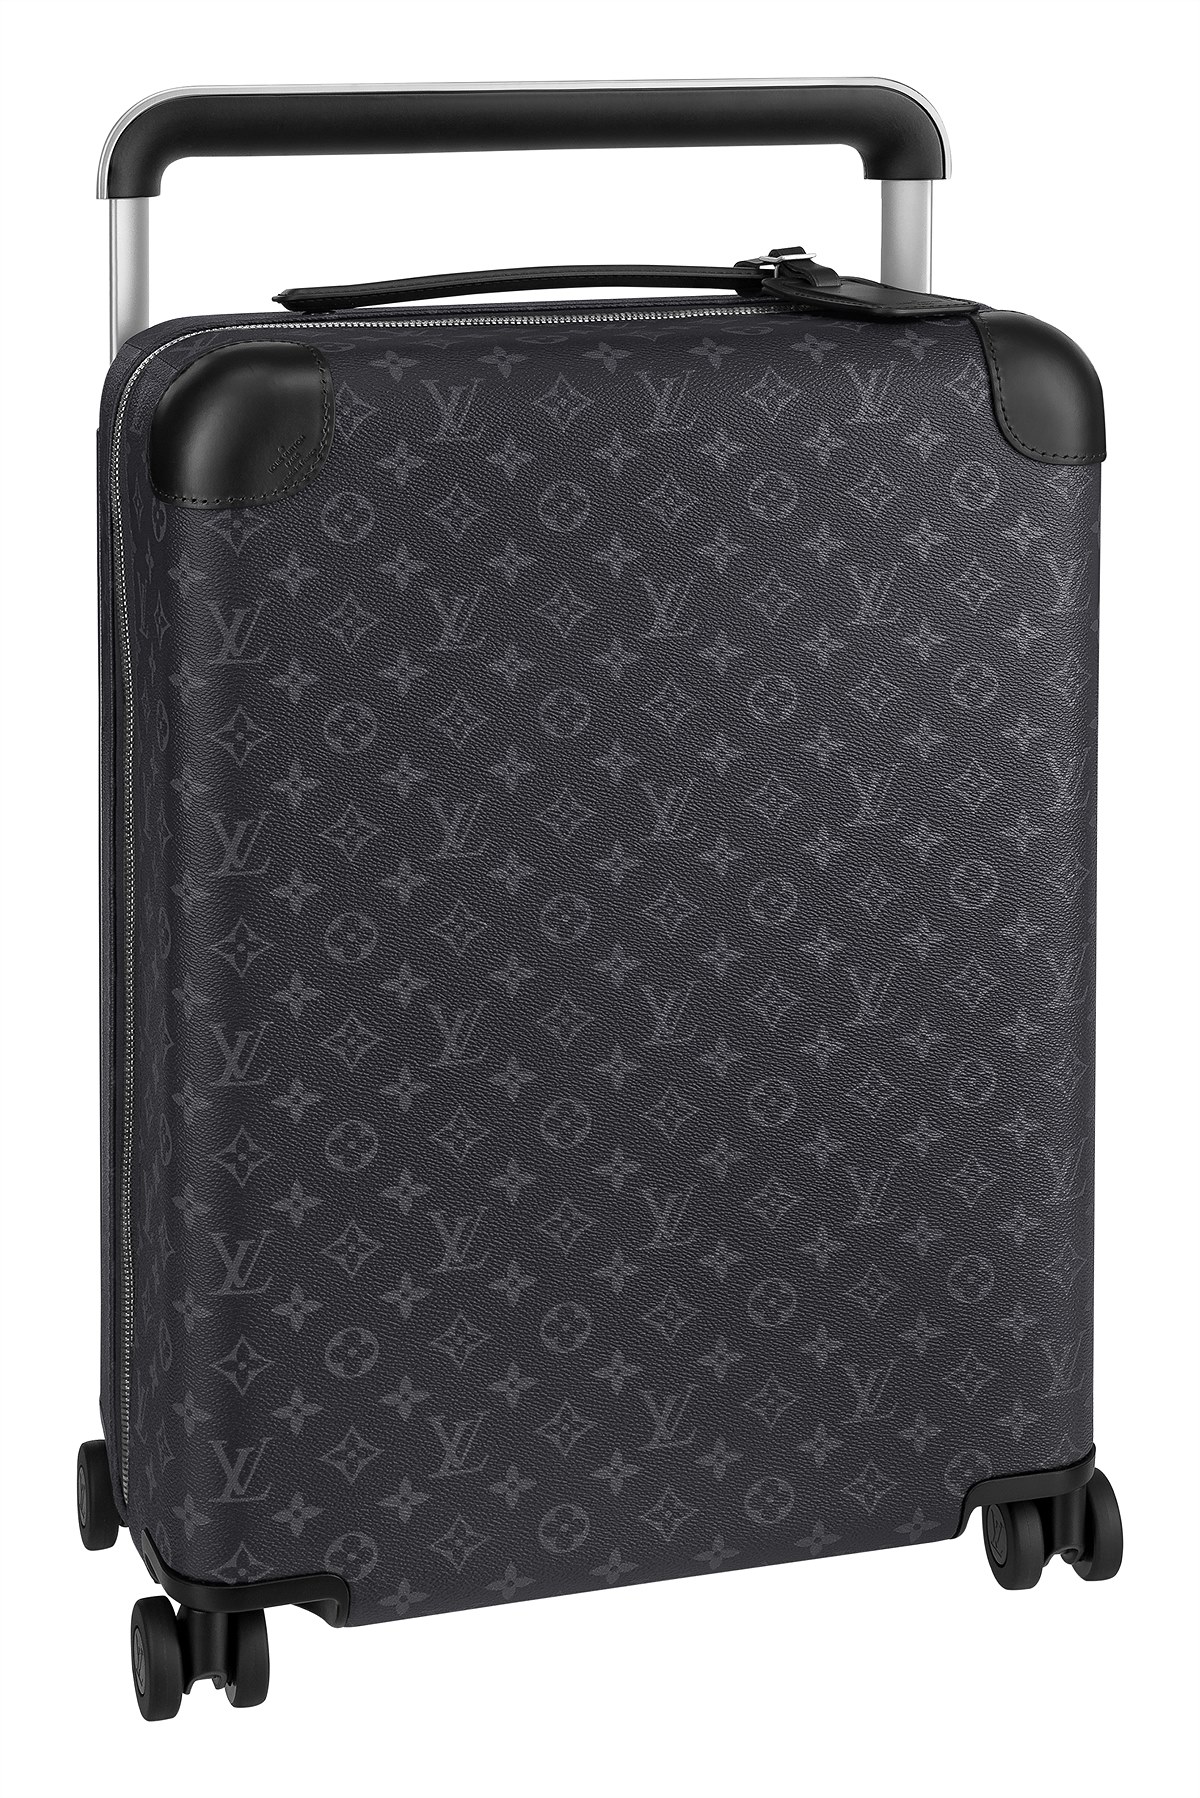 LV_The Rolling Luggage_M23002